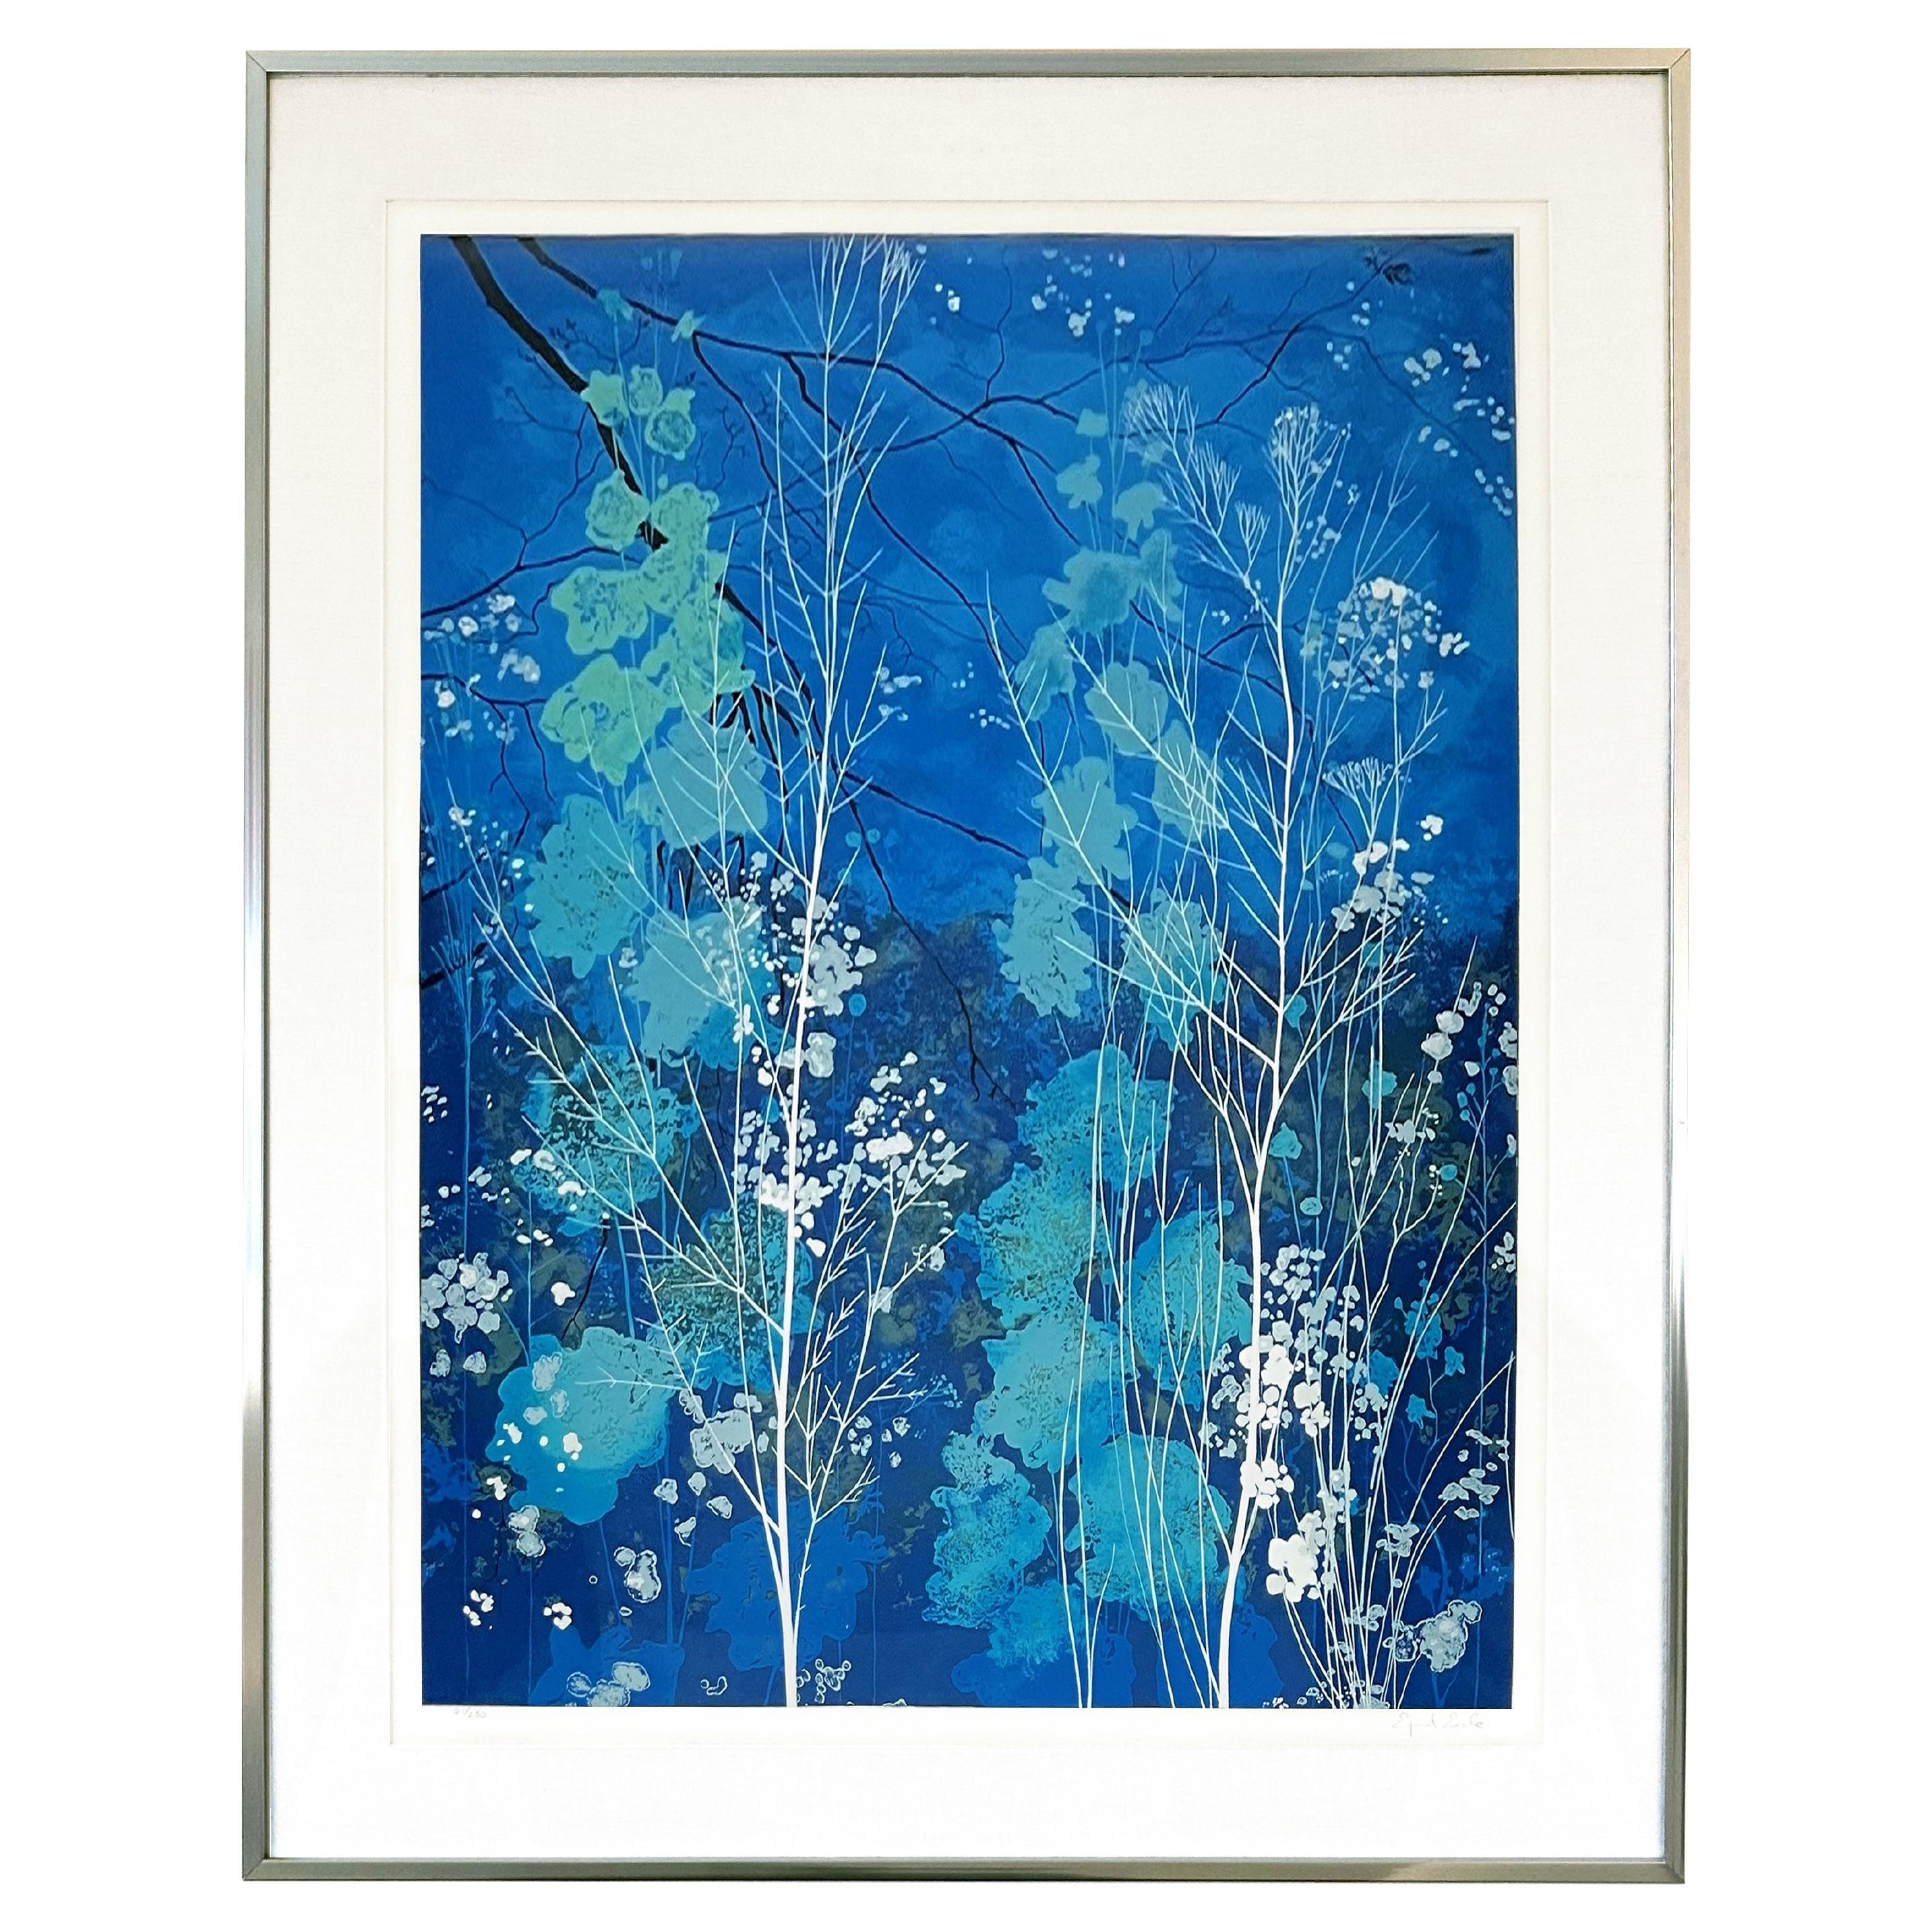 "Delphinium" by Eyvind Earle Serigraph on Paper, Signed and Numbered, Framed For Sale